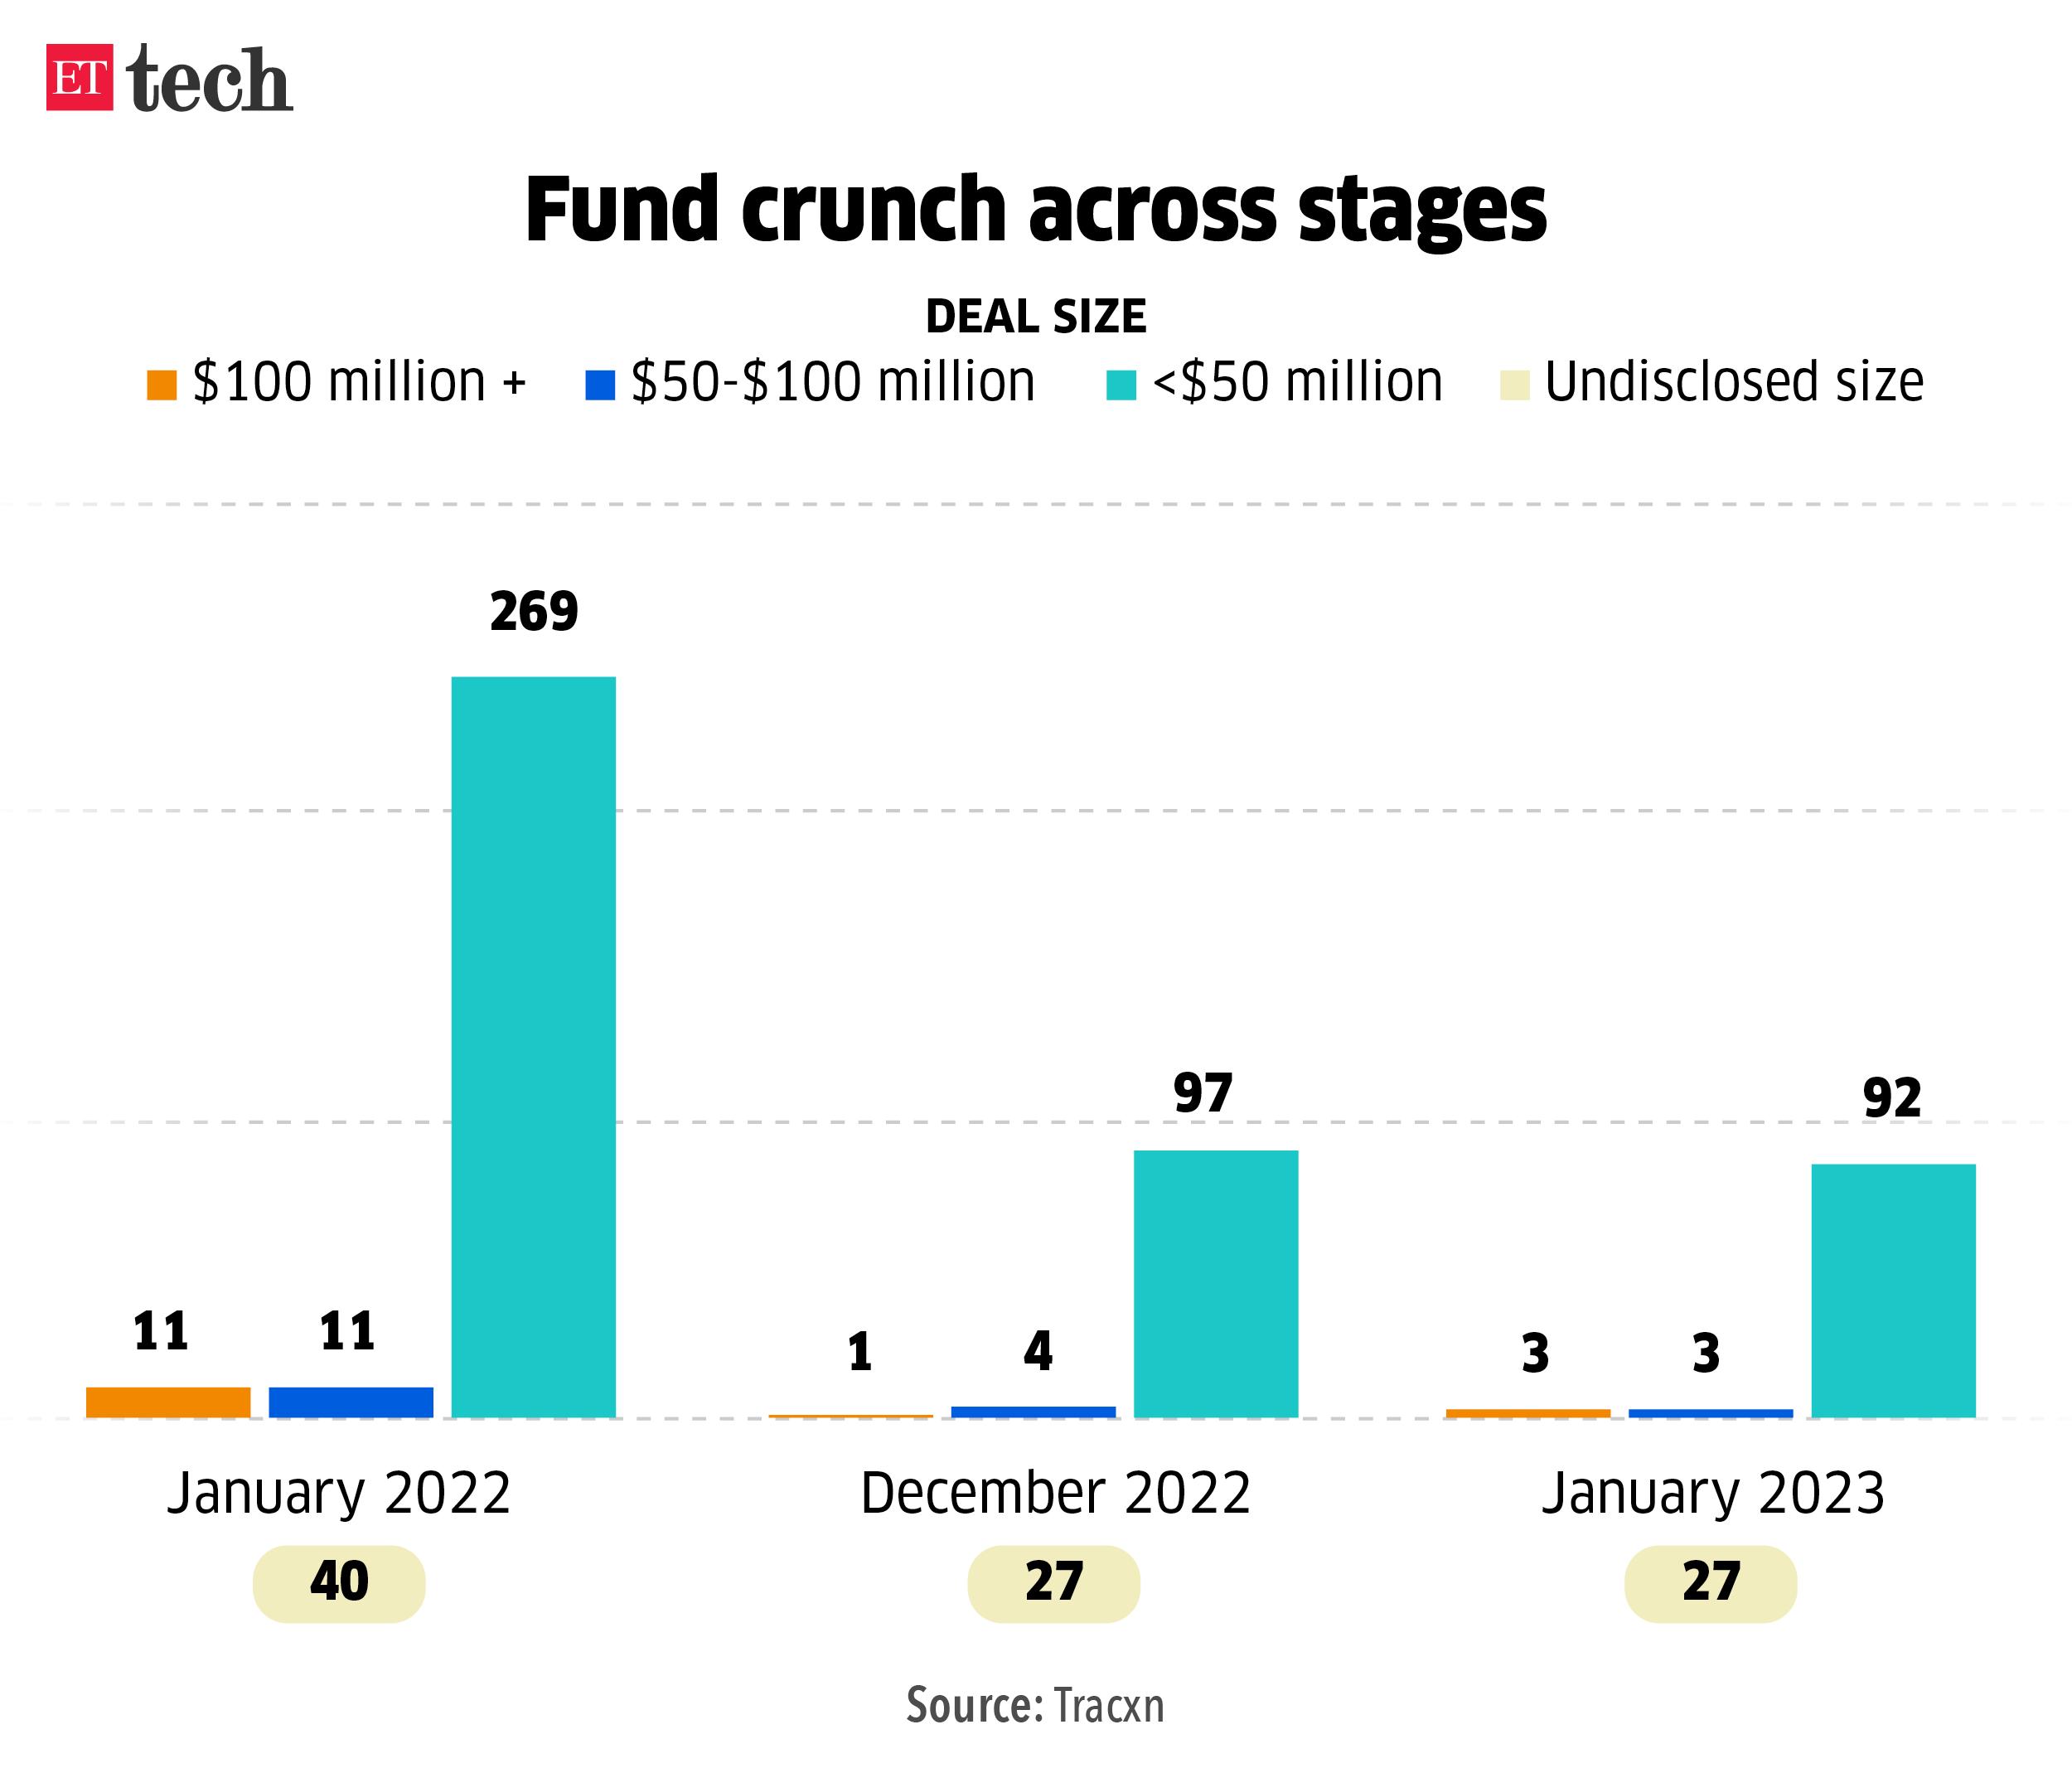 Fund crunch across stages